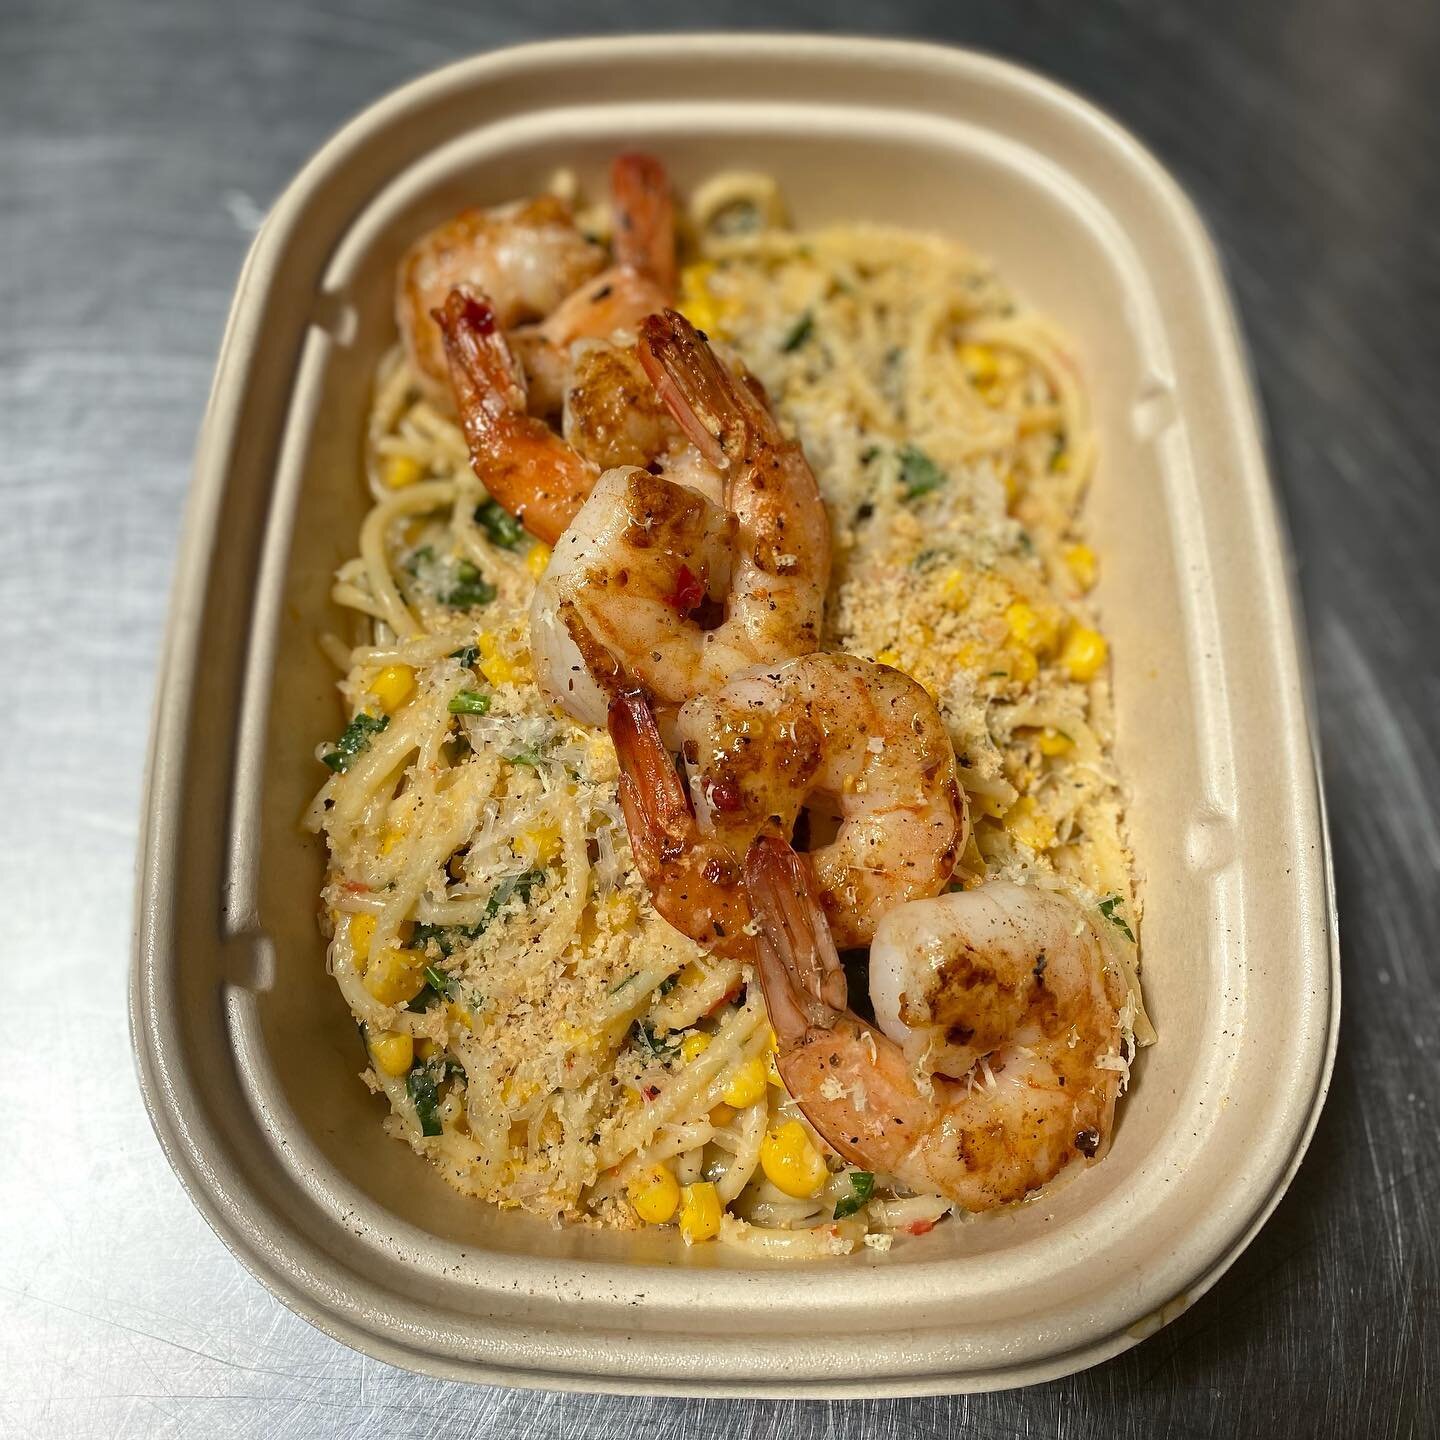 Pictured is a fan favorite dish, featured on 9.19&rsquo;s menu. Order for pick up or FREE delivery on Sunday 🦐 

Spaghetti.
Grilled shrimp. Yellow corn. 
Fermented chili. Garlic.
Lemon. Parsley. Bread crumb.